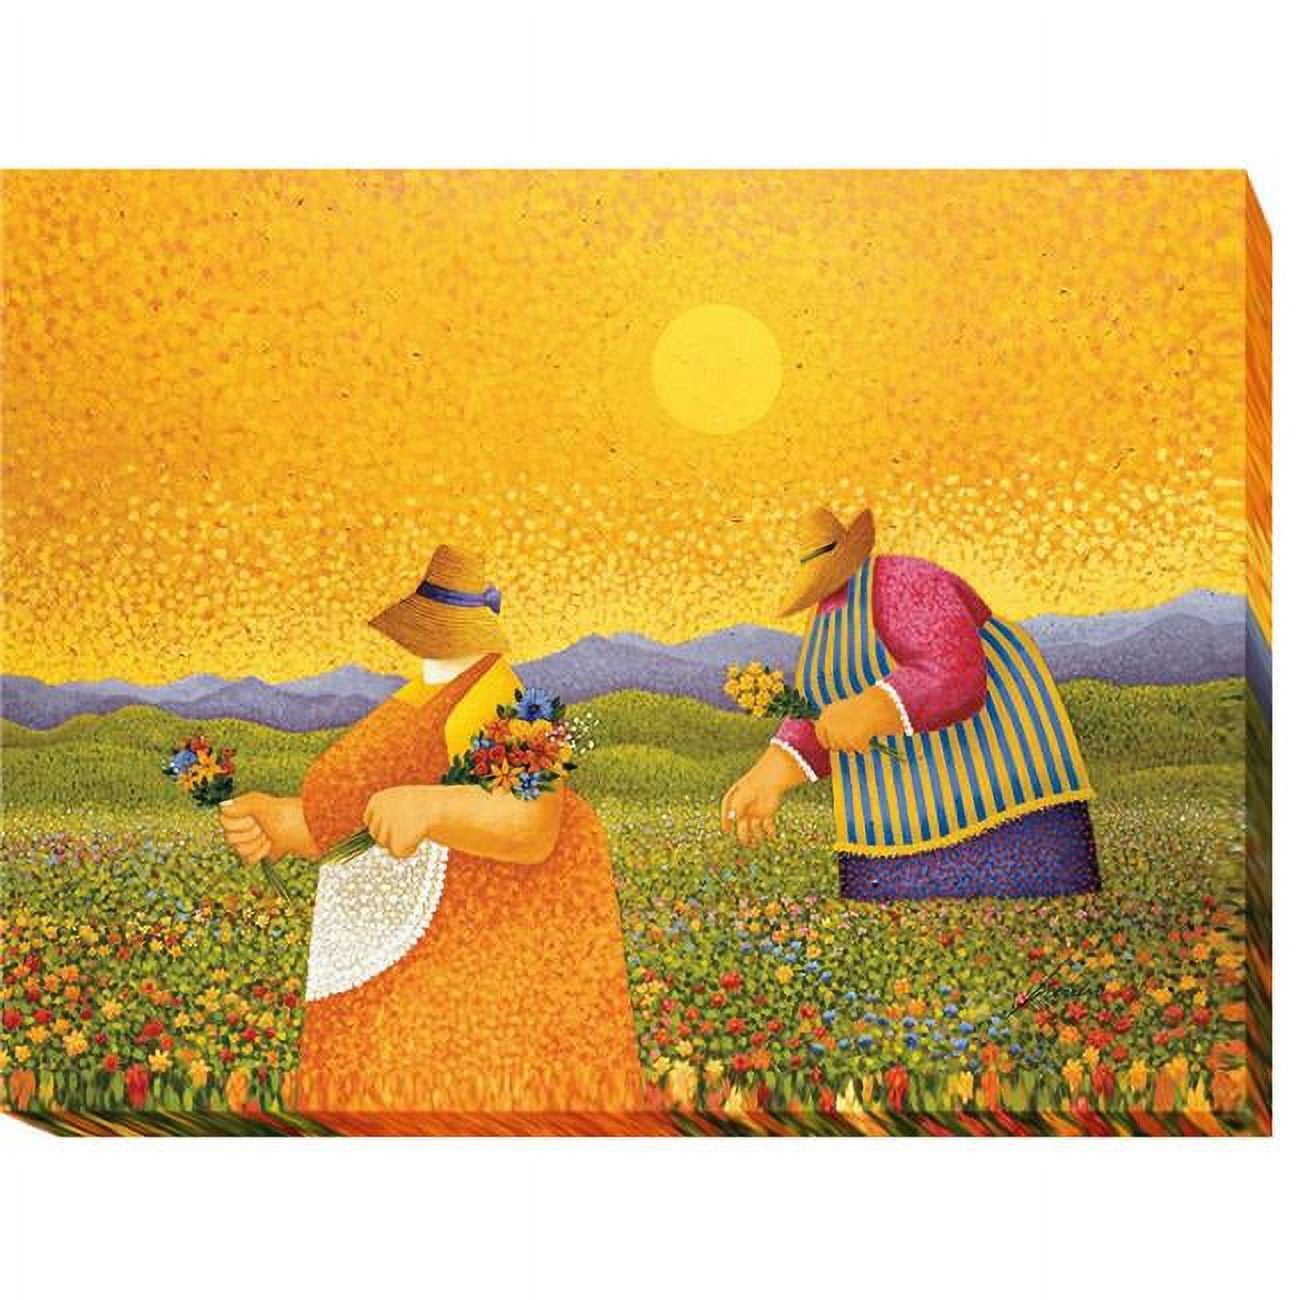 3040o394ig Picking Wildflowers By Lowell Herrero Premium Oversize Gallery-wrapped Canvas Giclee Art - 30 X 40 X 1.5 In.